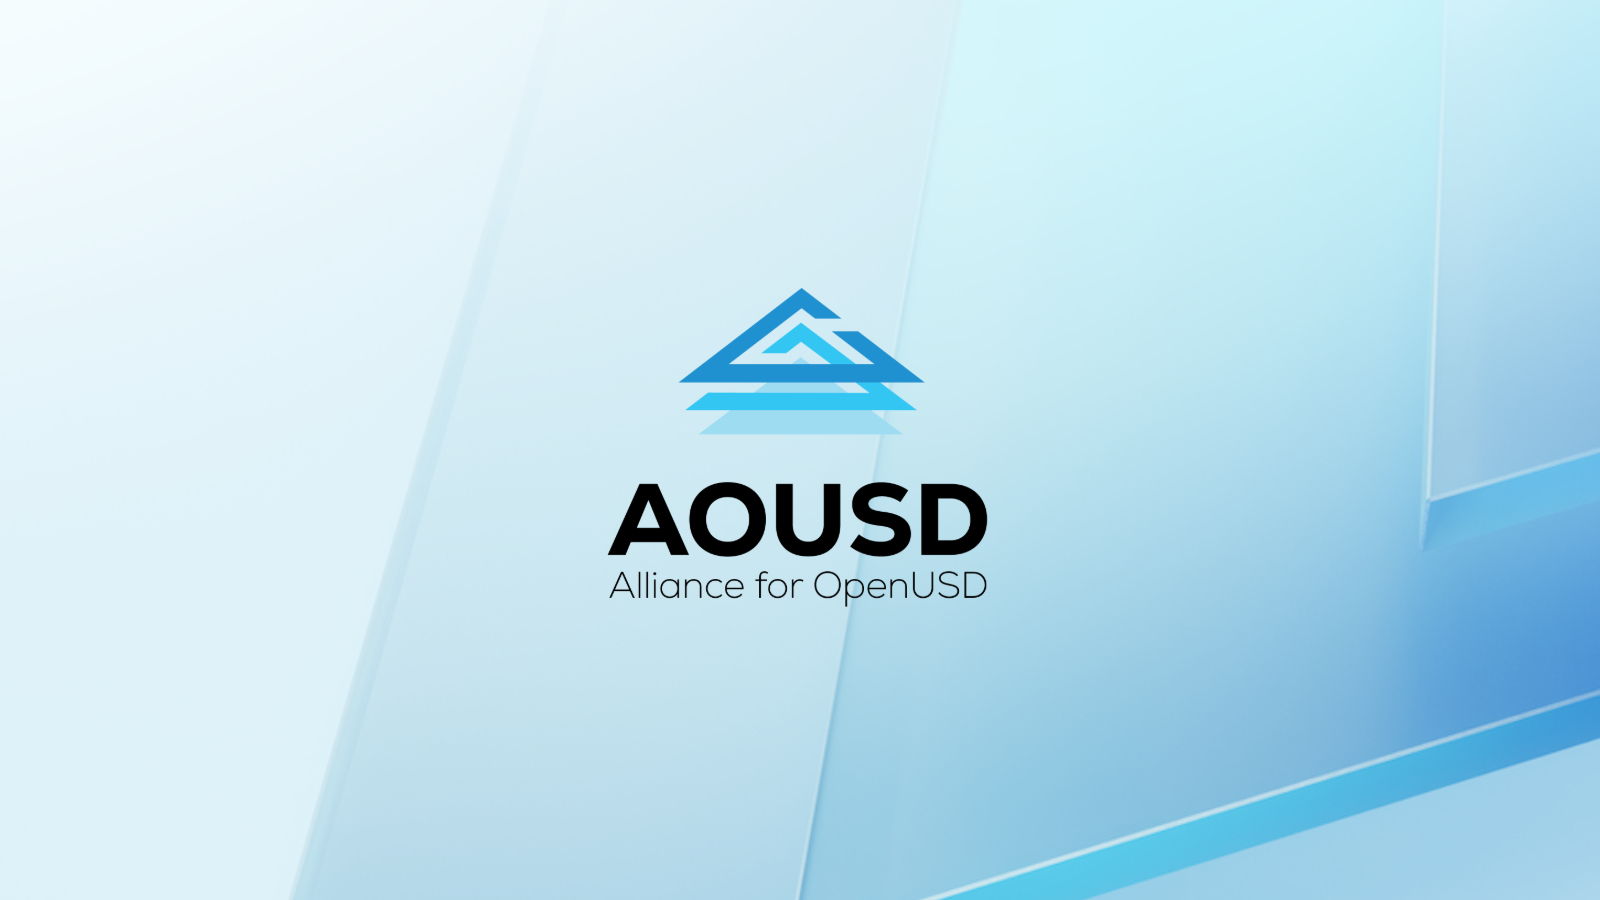 Alliance for OpenUSD Launches Materials & Geometry Working Groups, Forms New Liaison Relationship